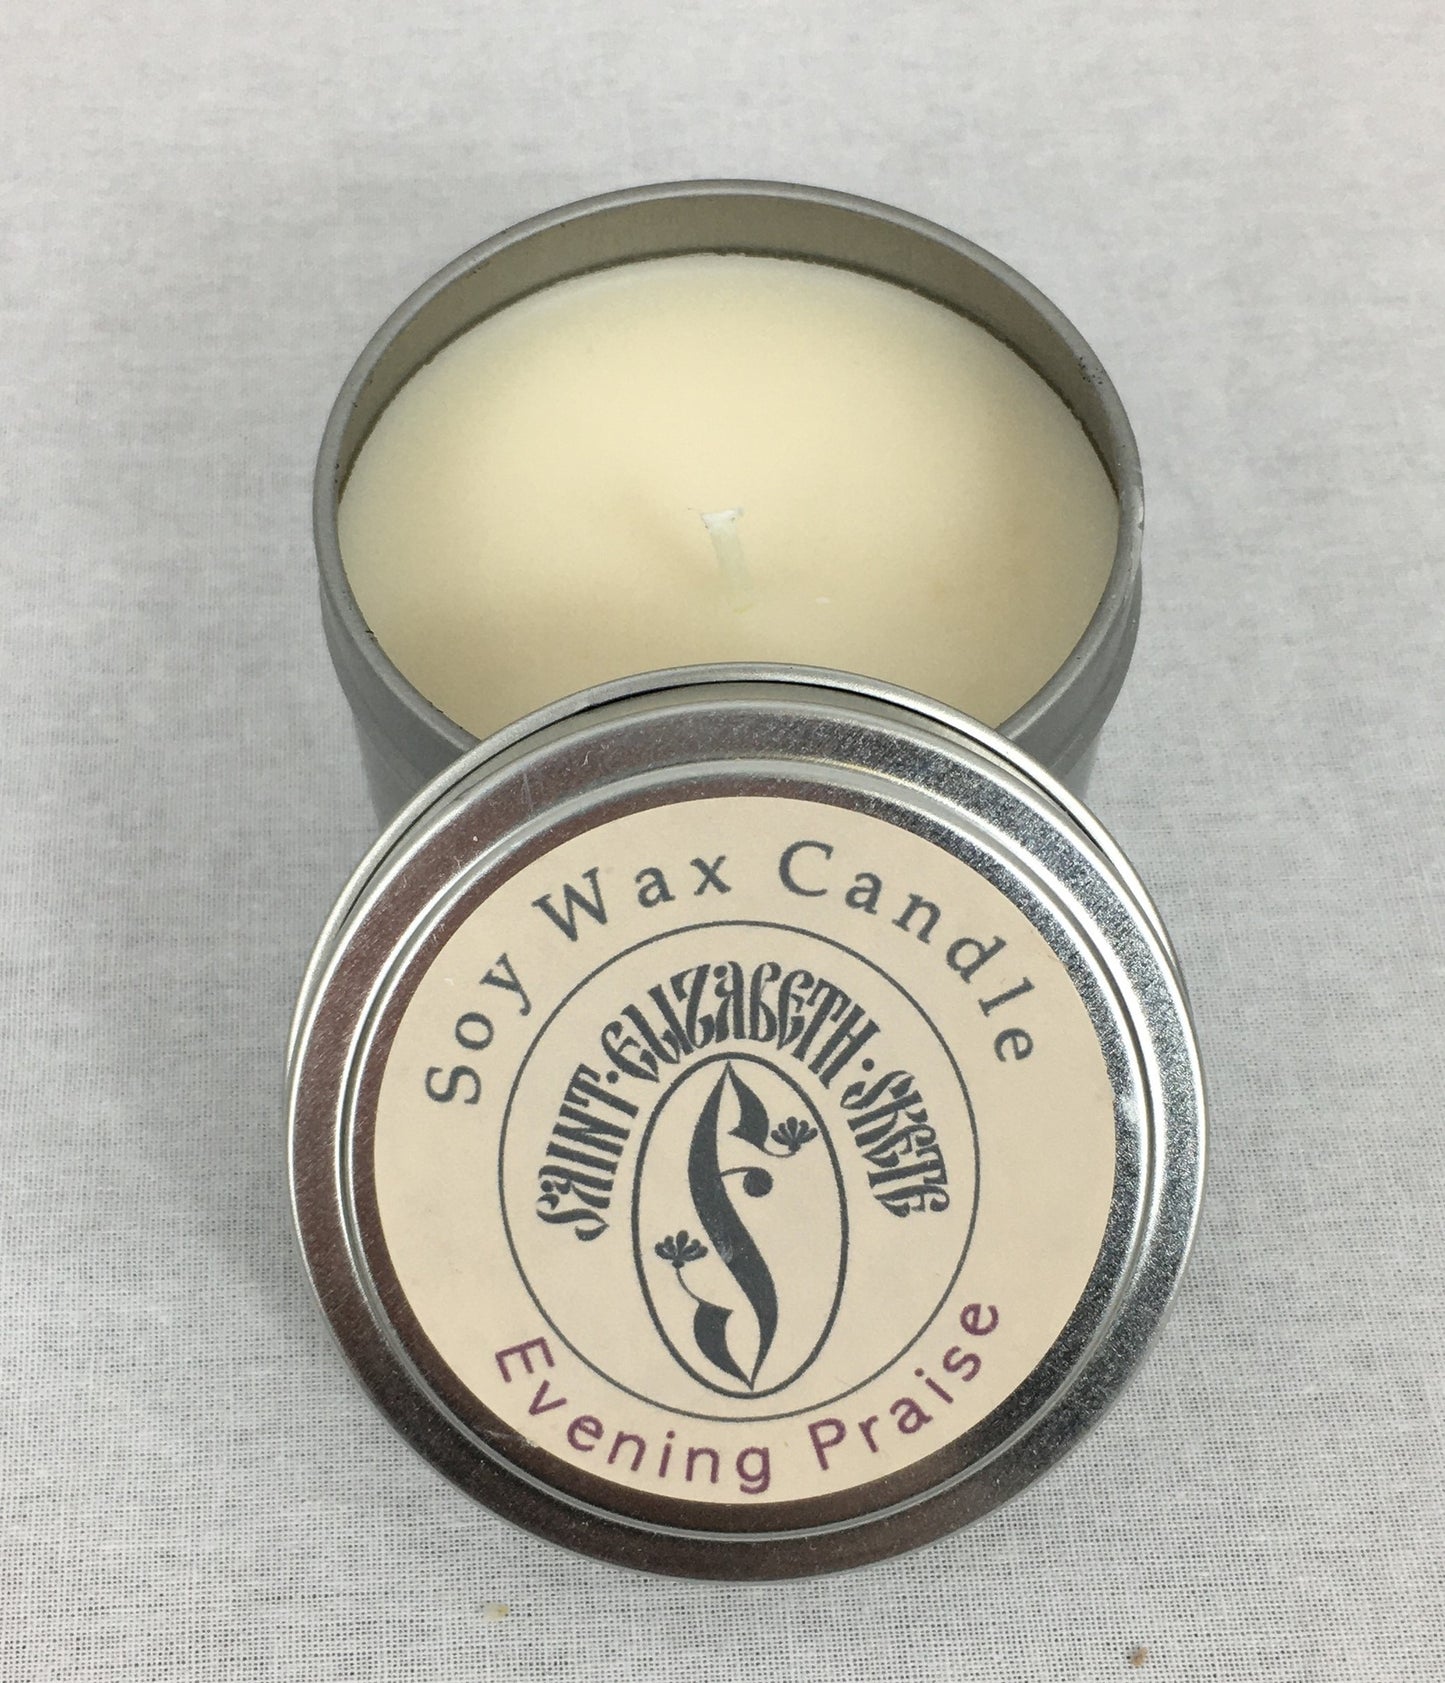 Evening Praise Scented Candle